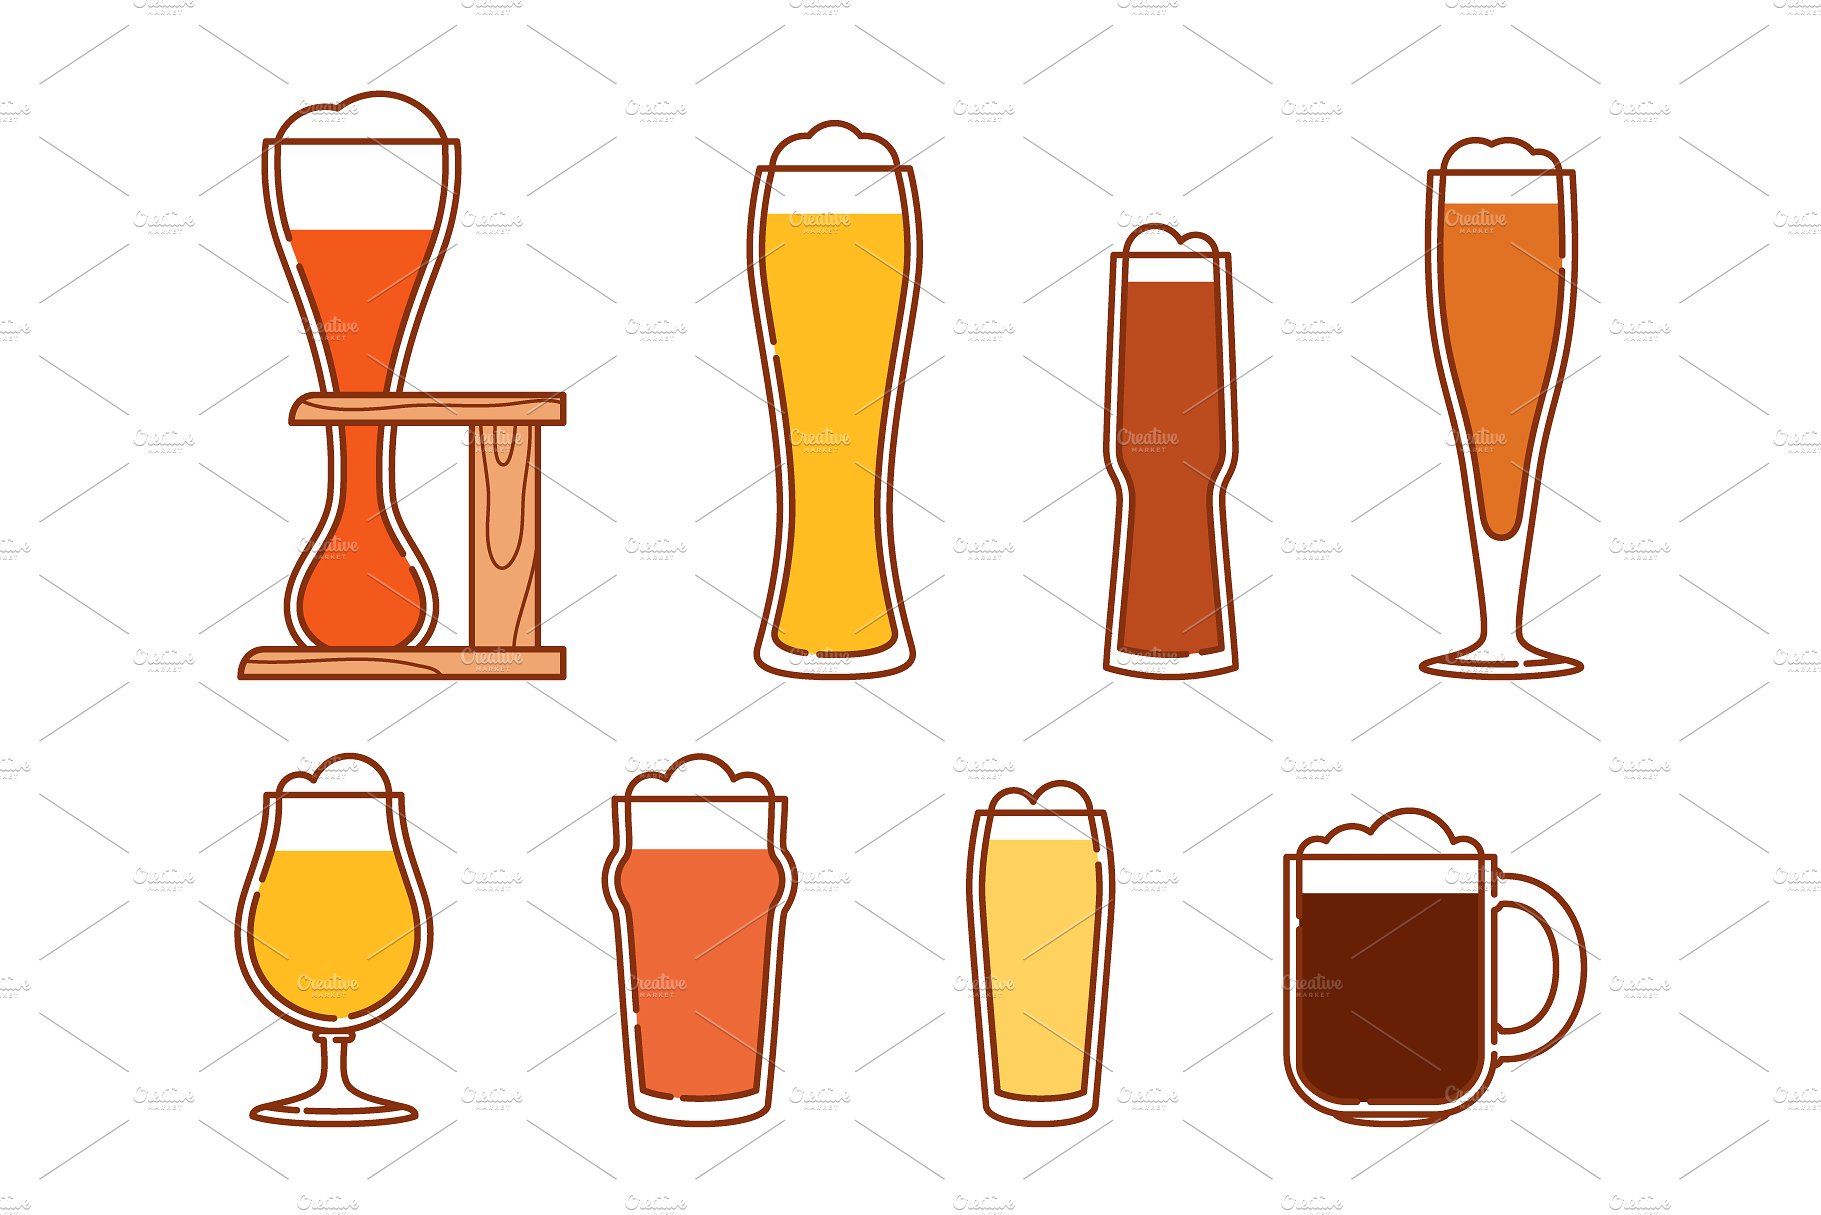 Beer glasses, icons and logos